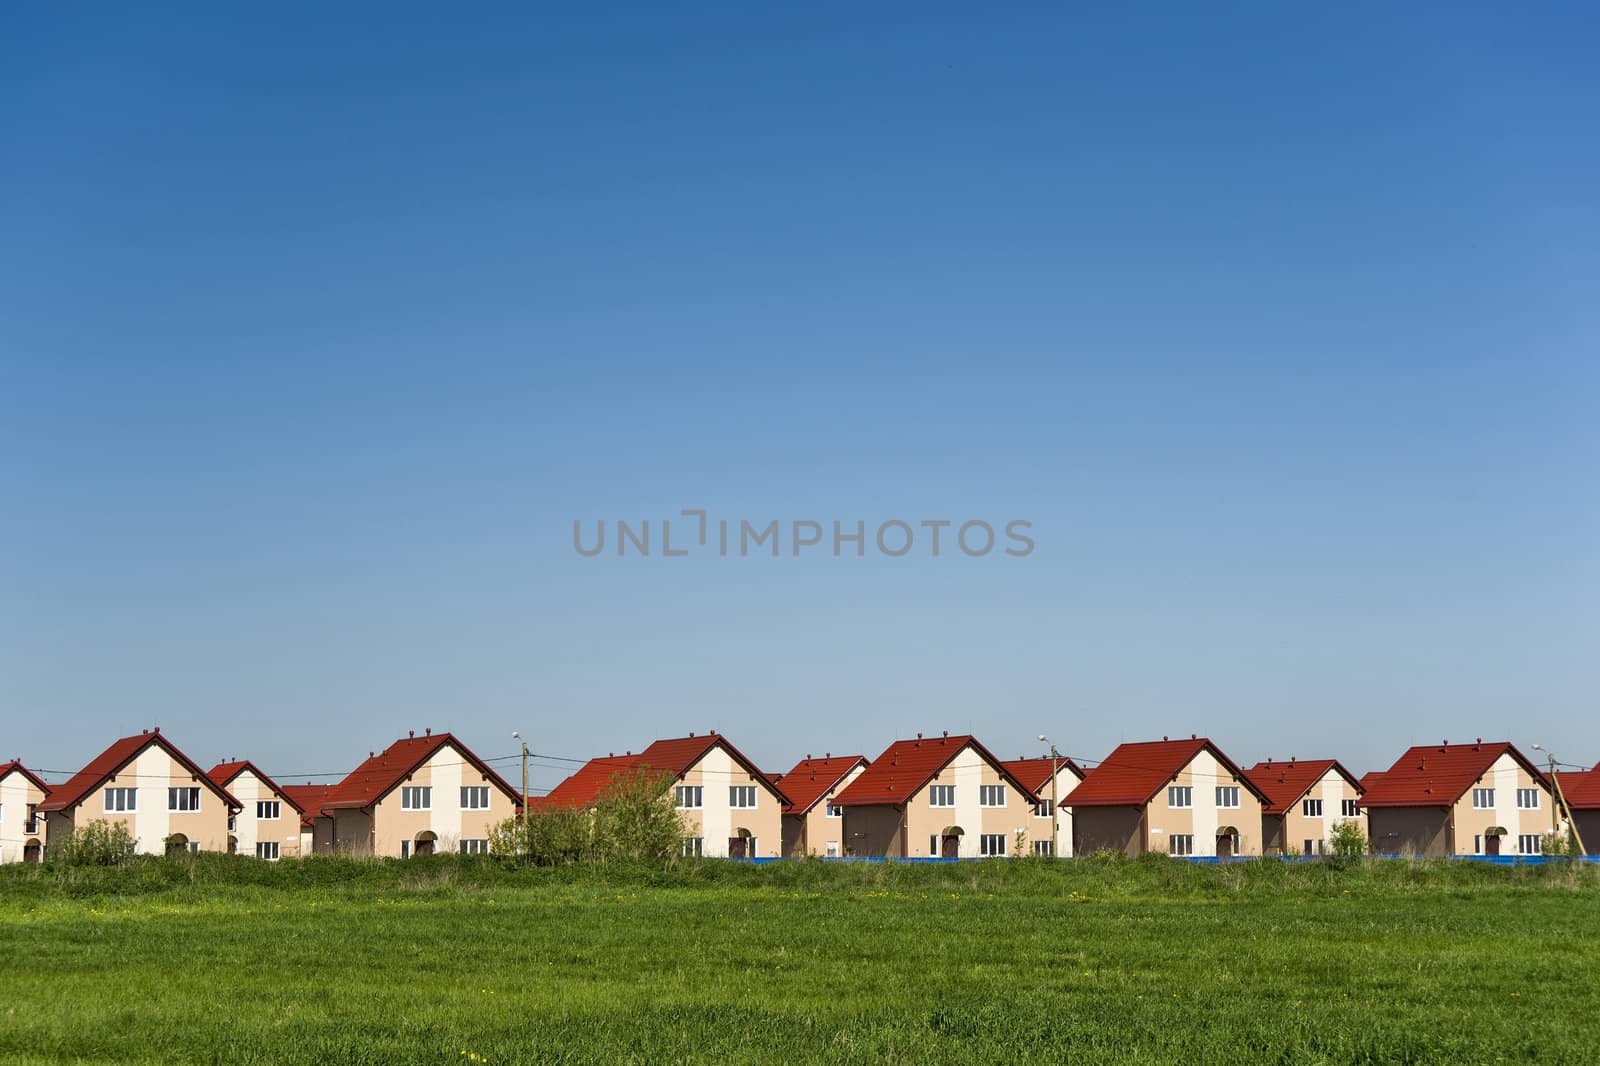 New cottages with red roofs and blue sky